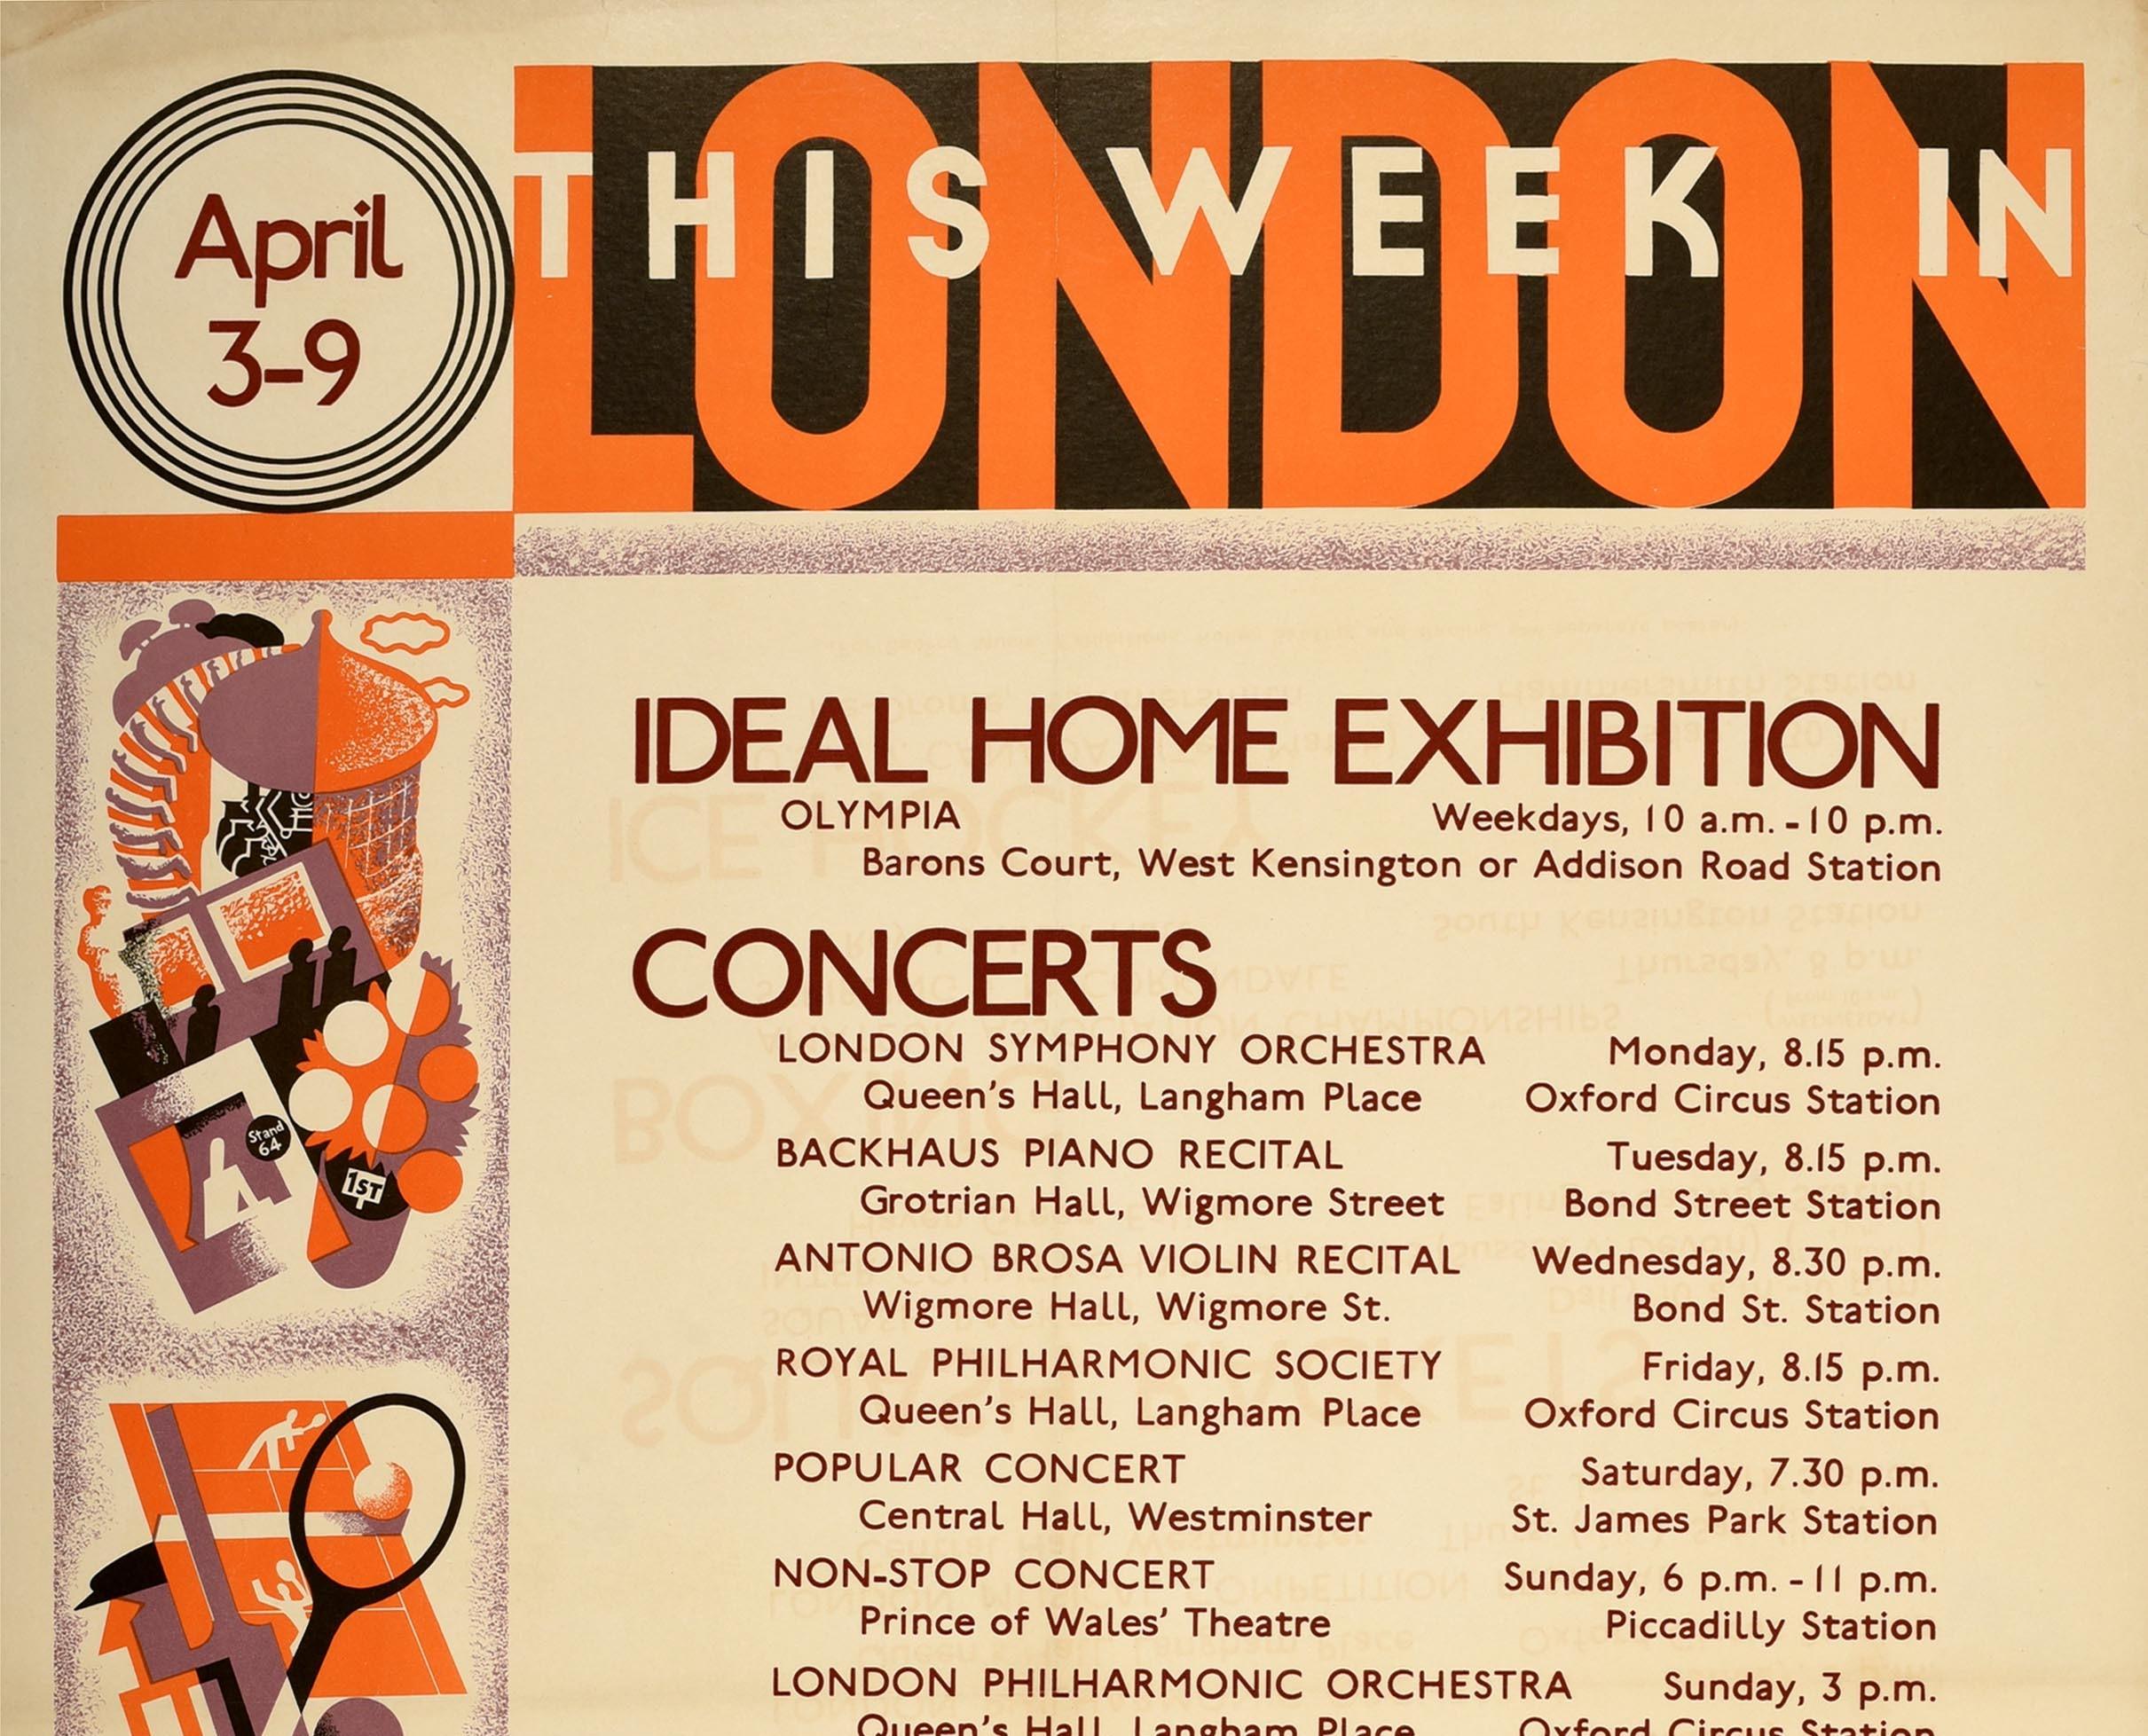 Original vintage London Transport poster featuring a programme of events from 3 to 9 April - This Week in London Ideal Home Exhibition Olympia Concerts Squash Rackets Boxing Ice Hockey - with the text in the centre and details including the London